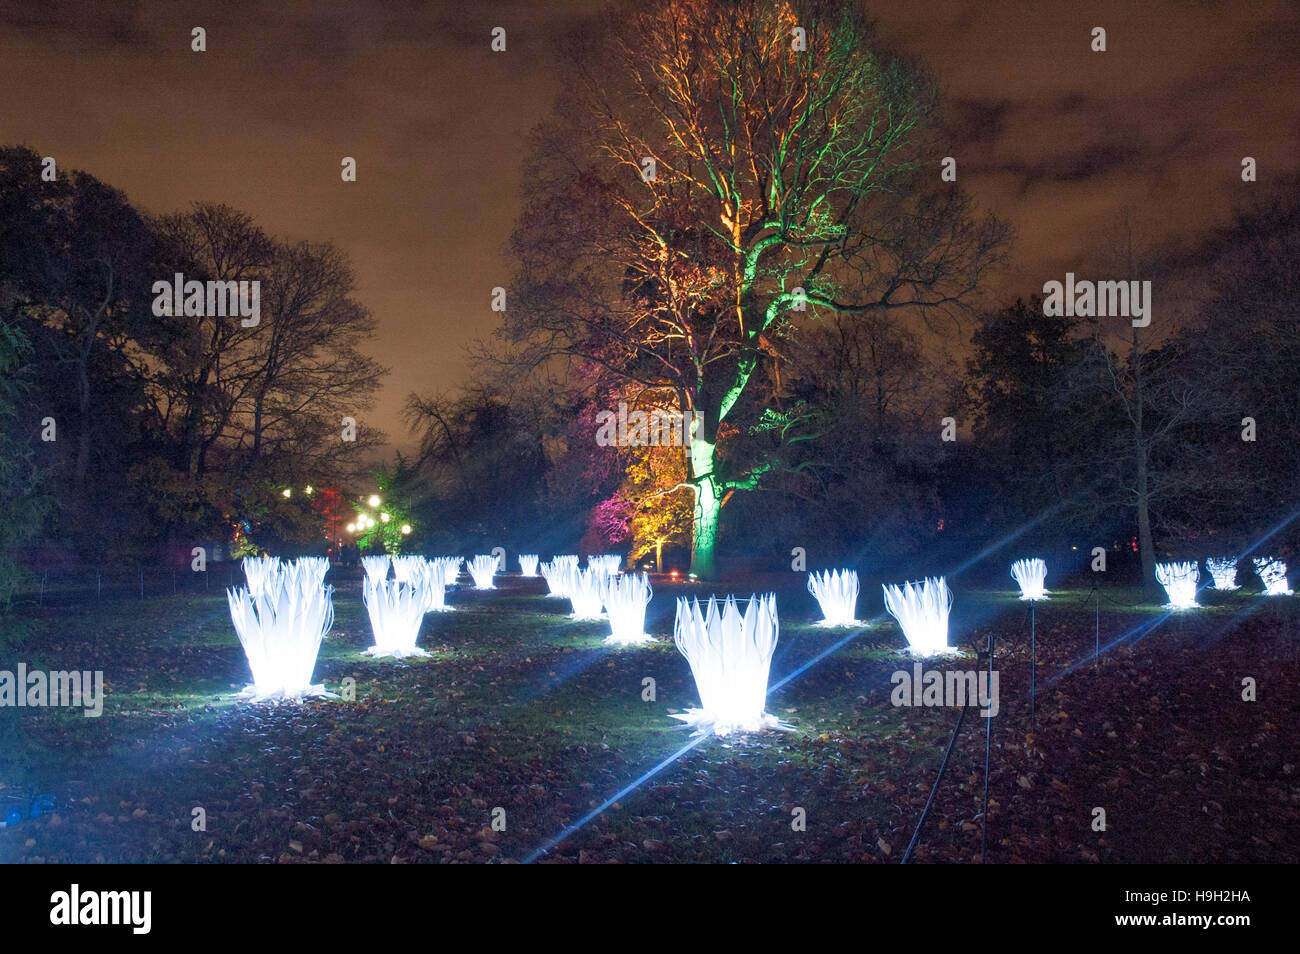 London, UK. 22nd Nov, 2016. Noctiflors, giant sculptural light installations at Christmas at Kew light trail.  More than 60,000 lights light up the trees, plants and gardens. The trail is more than a mile long and includes artworks from both UK and international artists and designers. The show opens 23rd November 2016 and closes 2nd January 2017. Credit:  Tricia de Courcy Ling/Alamy Live News Stock Photo